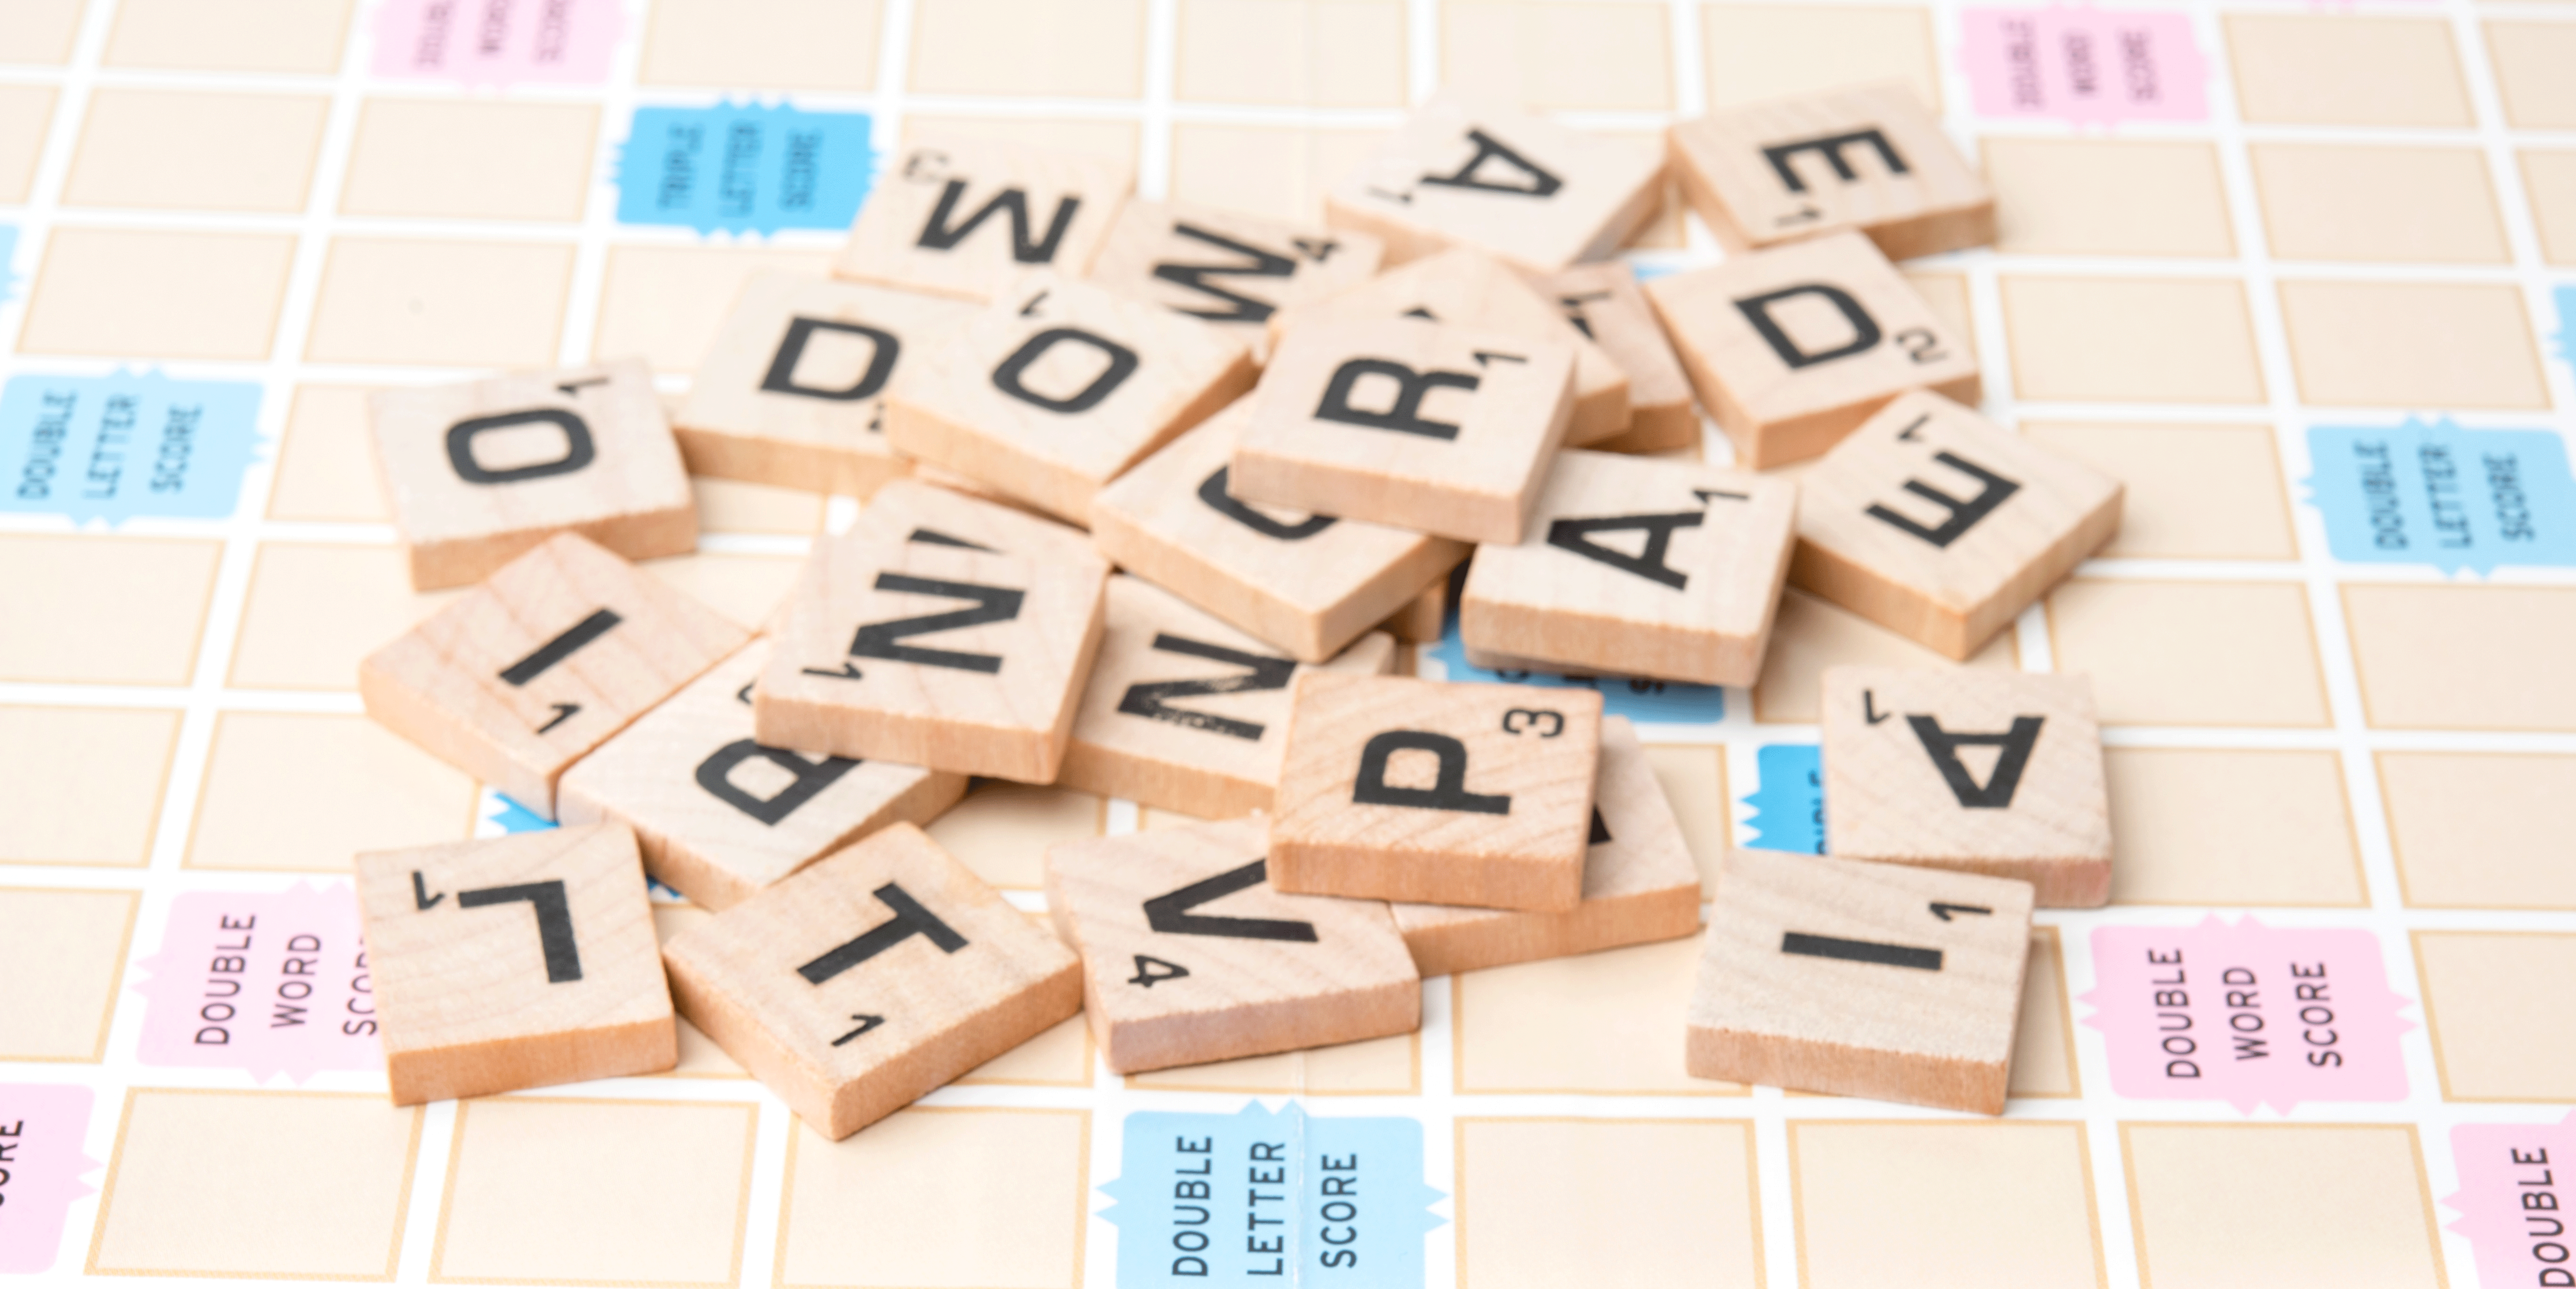 6 Letter IB Guess That Logo - 25 Best Word Board Games - Best Board Games If You Like Scrabble